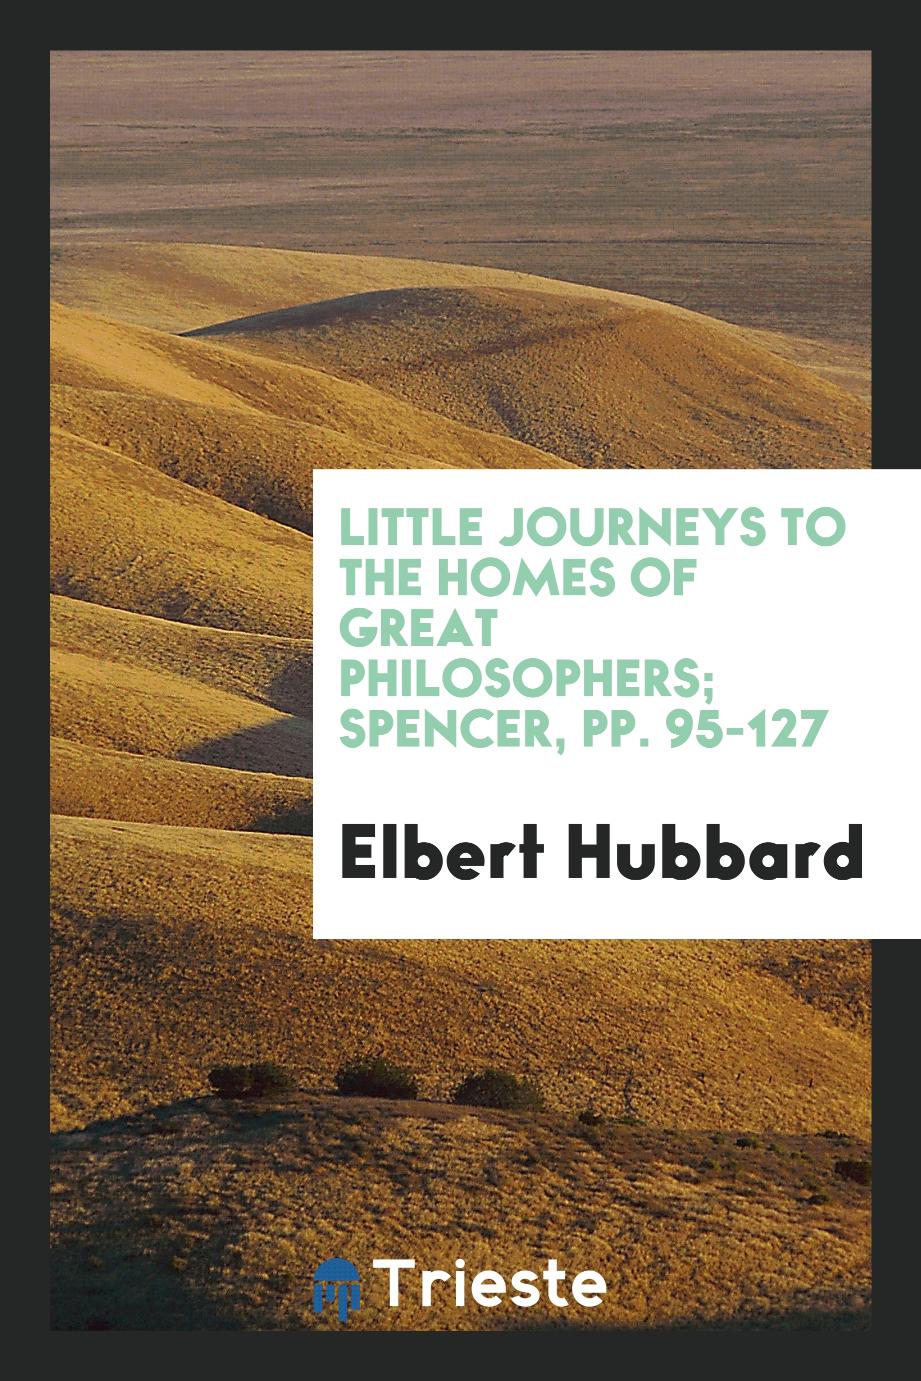 Little Journeys to the Homes of Great Philosophers; Spencer, pp. 95-127